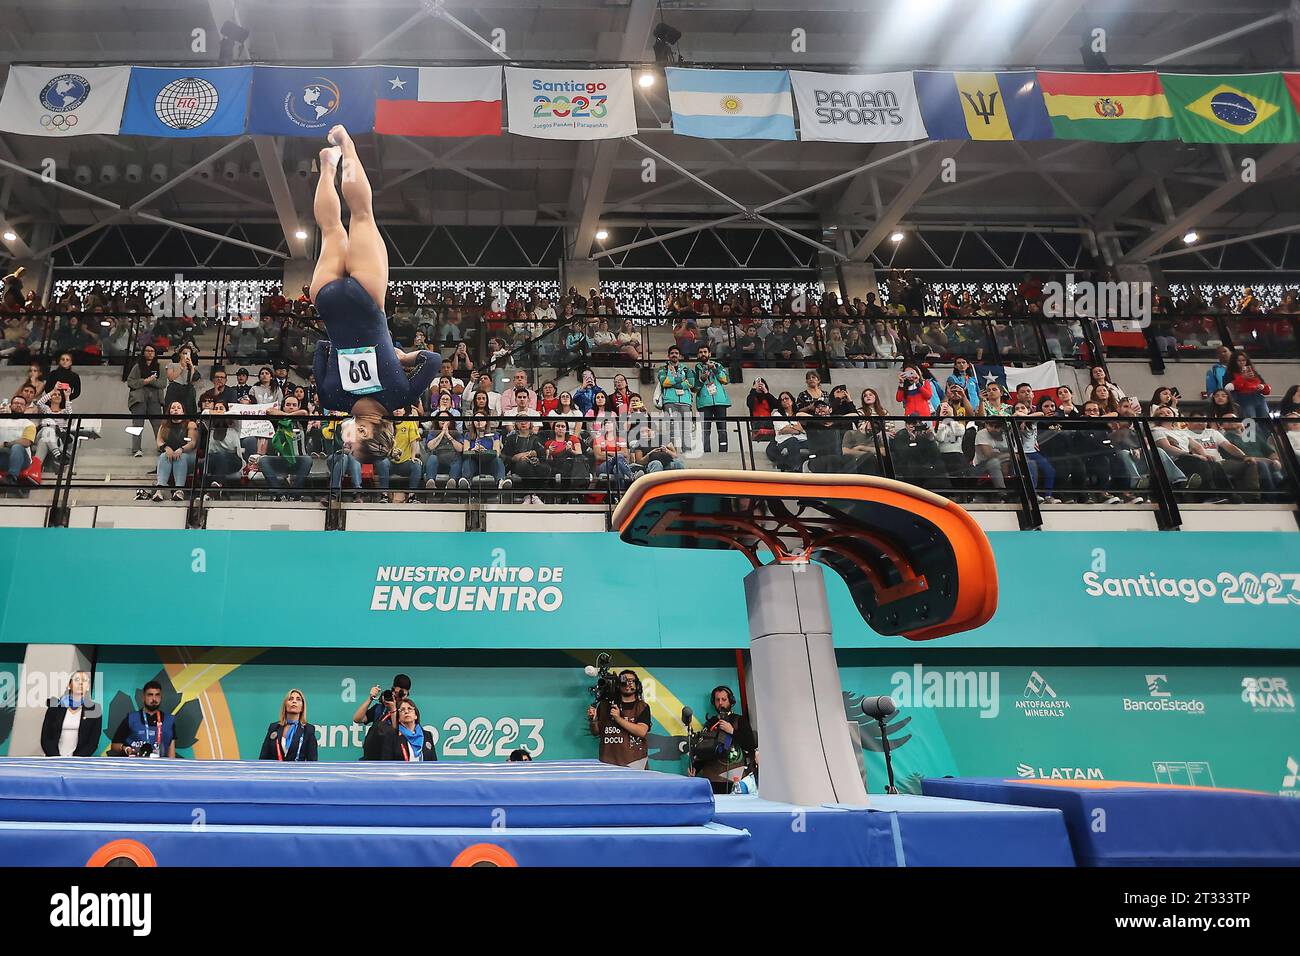 Santiago, Chile. 22nd Oct, 2023. Flavia Saraiva of Brazil, competes in Team Standings during the Artistic Gymnastics of the Santiago 2023 Pan American Games, at National Stadium Sports Park, in Santiago on October 22. Photo: Heuler Andrey/DiaEsportivo/Alamy Live News Credit: DiaEsportivo/Alamy Live News Stock Photo